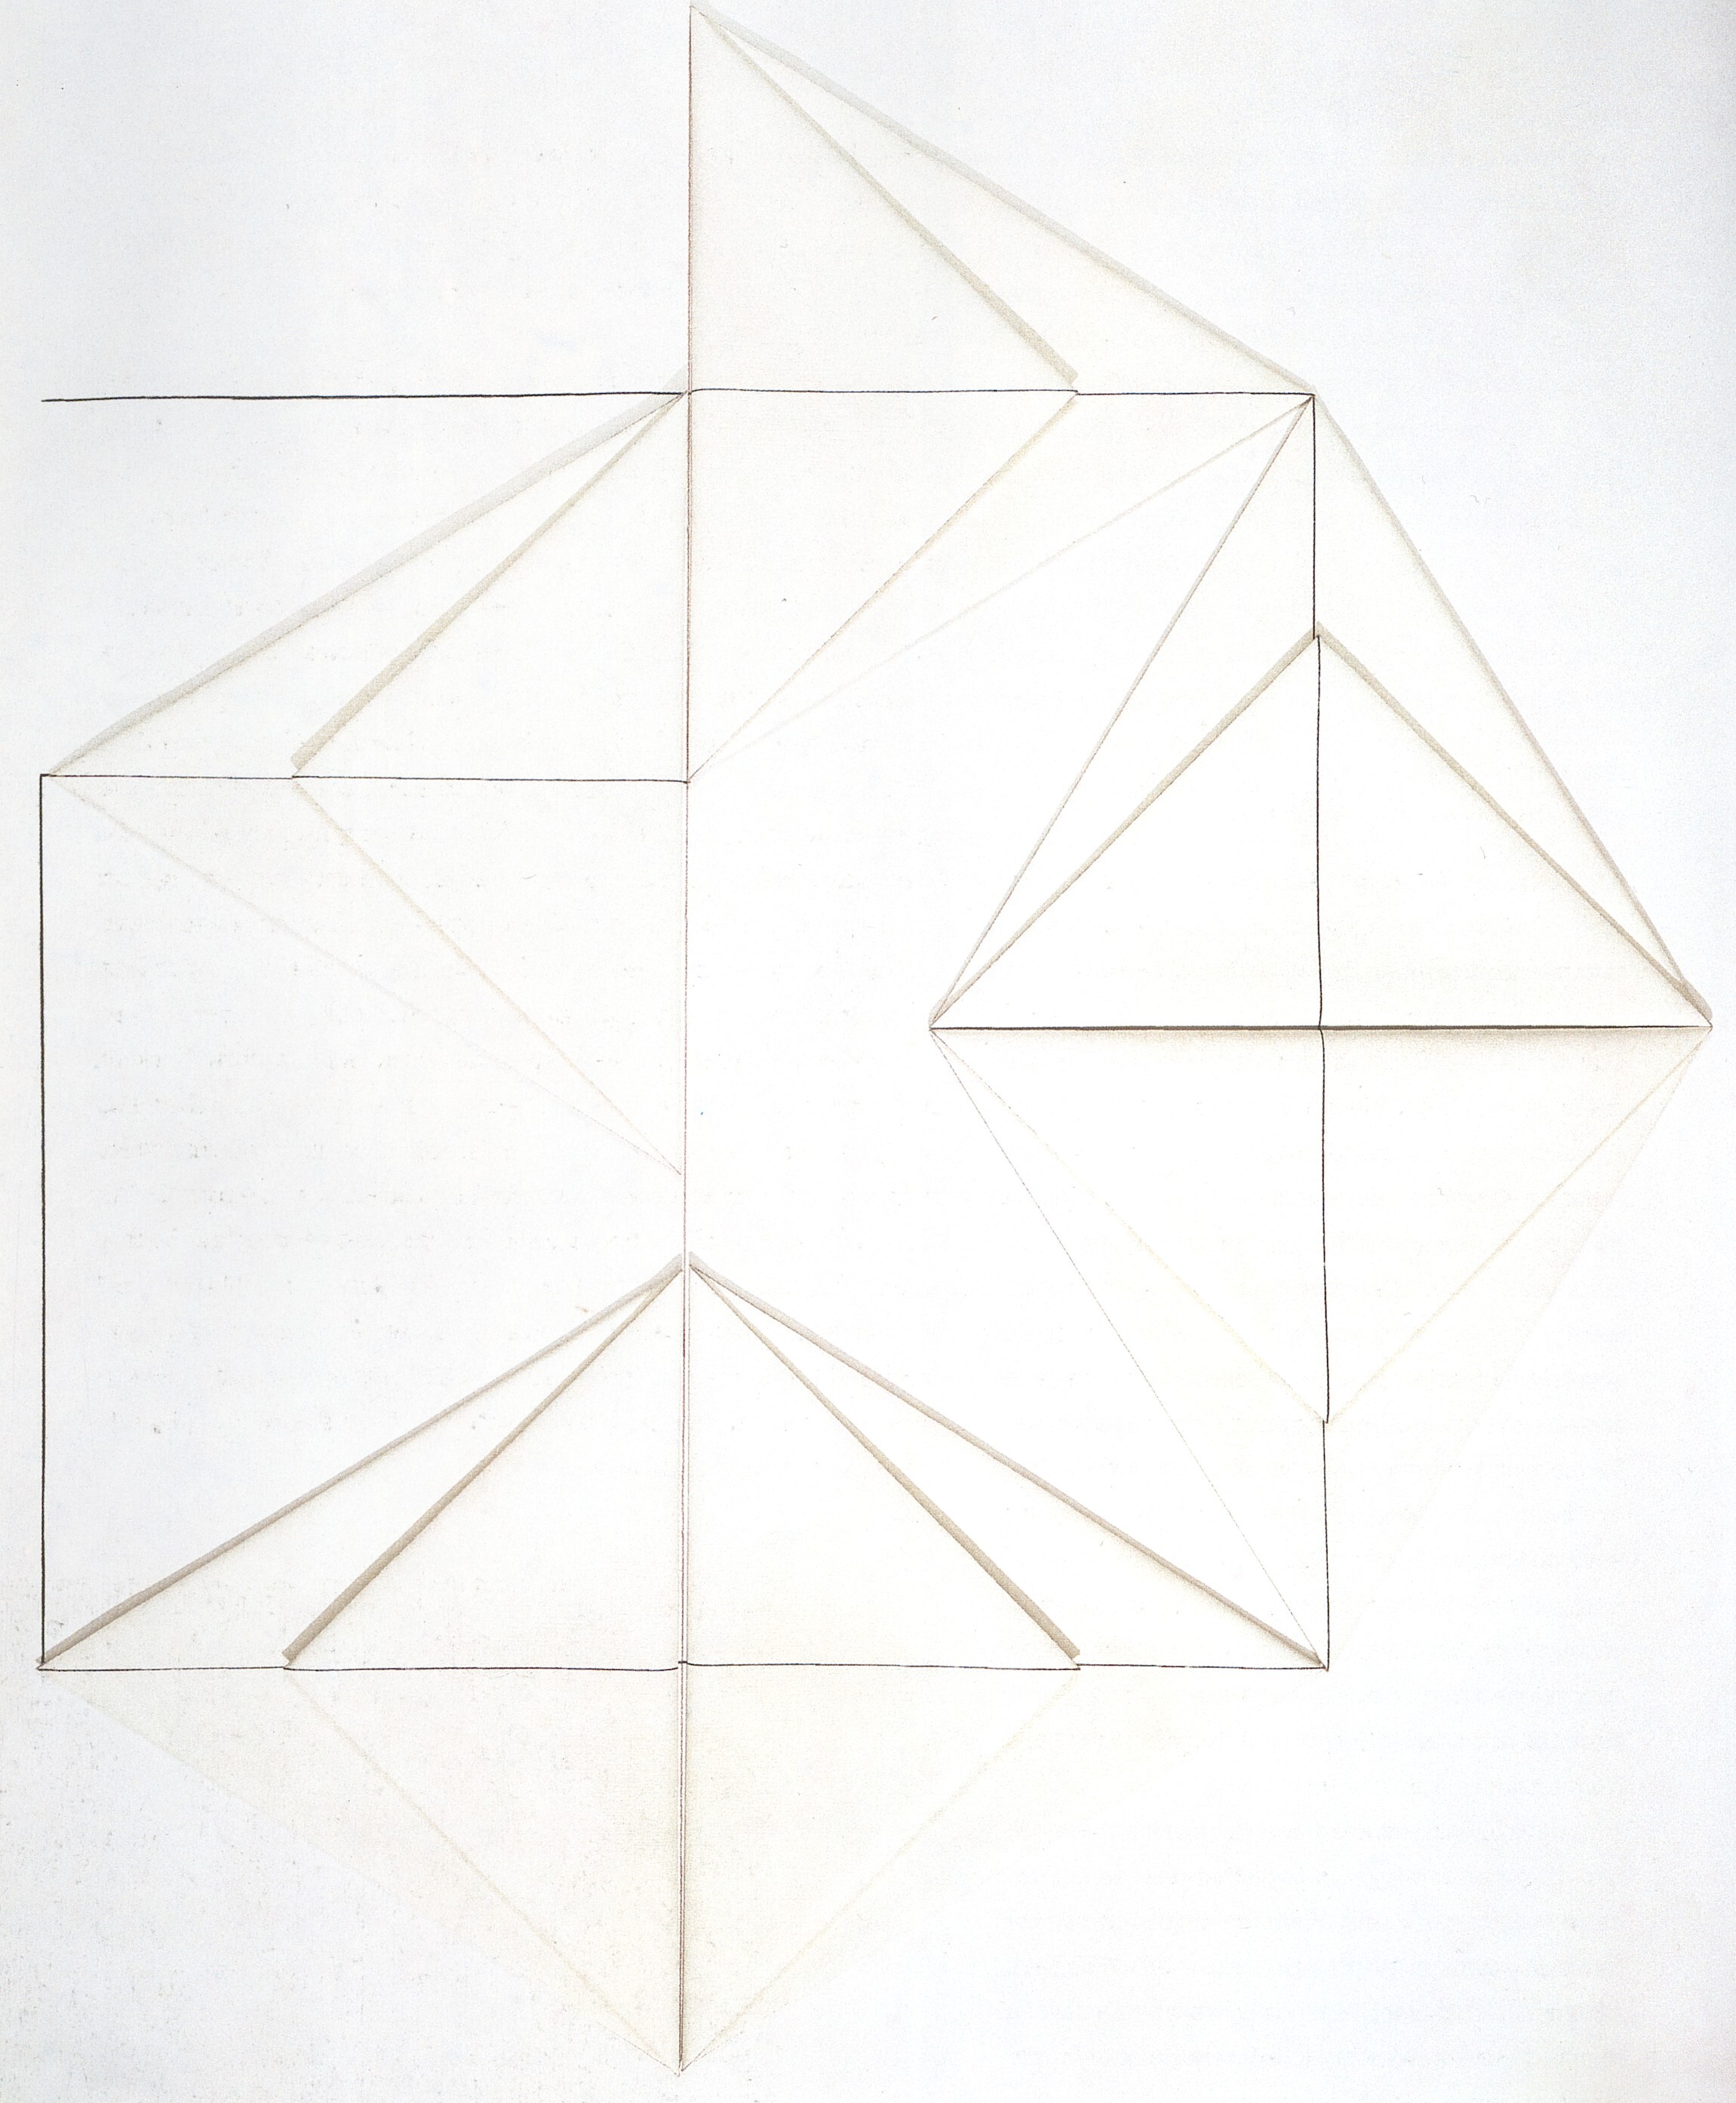 Six folded white triangles resembling origami form a large geometric shape on a white background. Connected by a continuous line that bisects their center, the corners of each triangle touch and encourage the eye to move in a circular fashion.